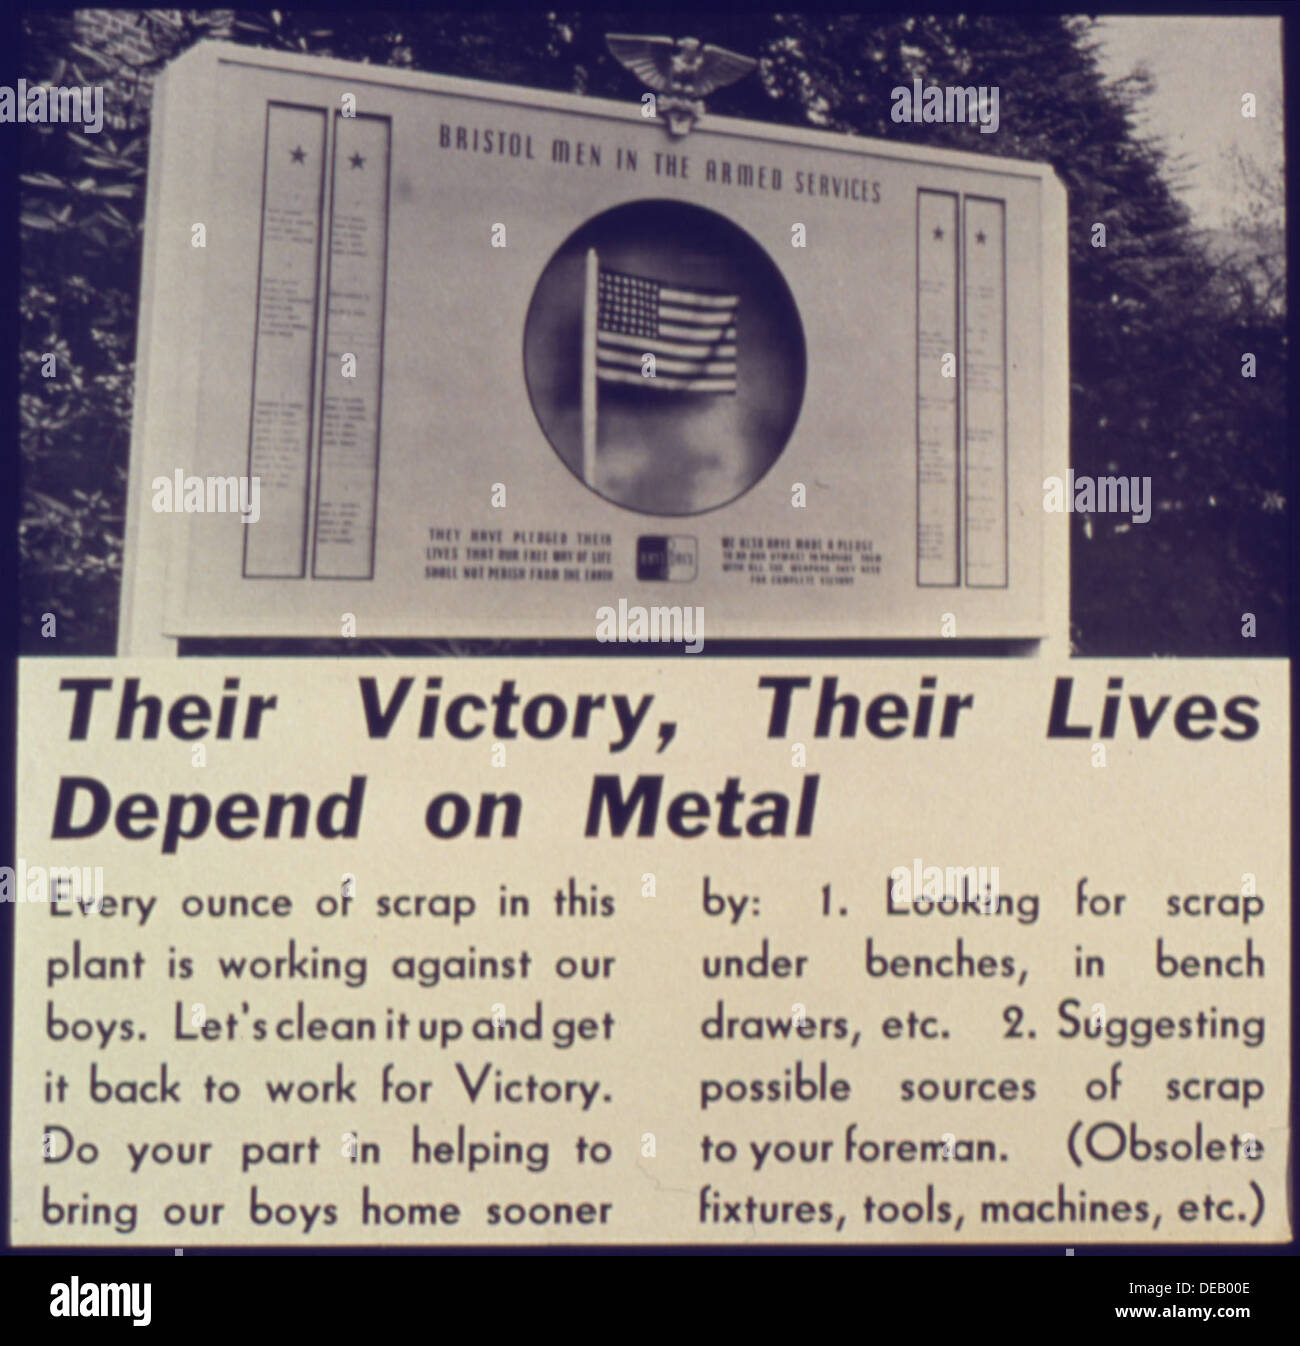 Their Victory, Their Lives Depend on Metal 533970 Stock Photo